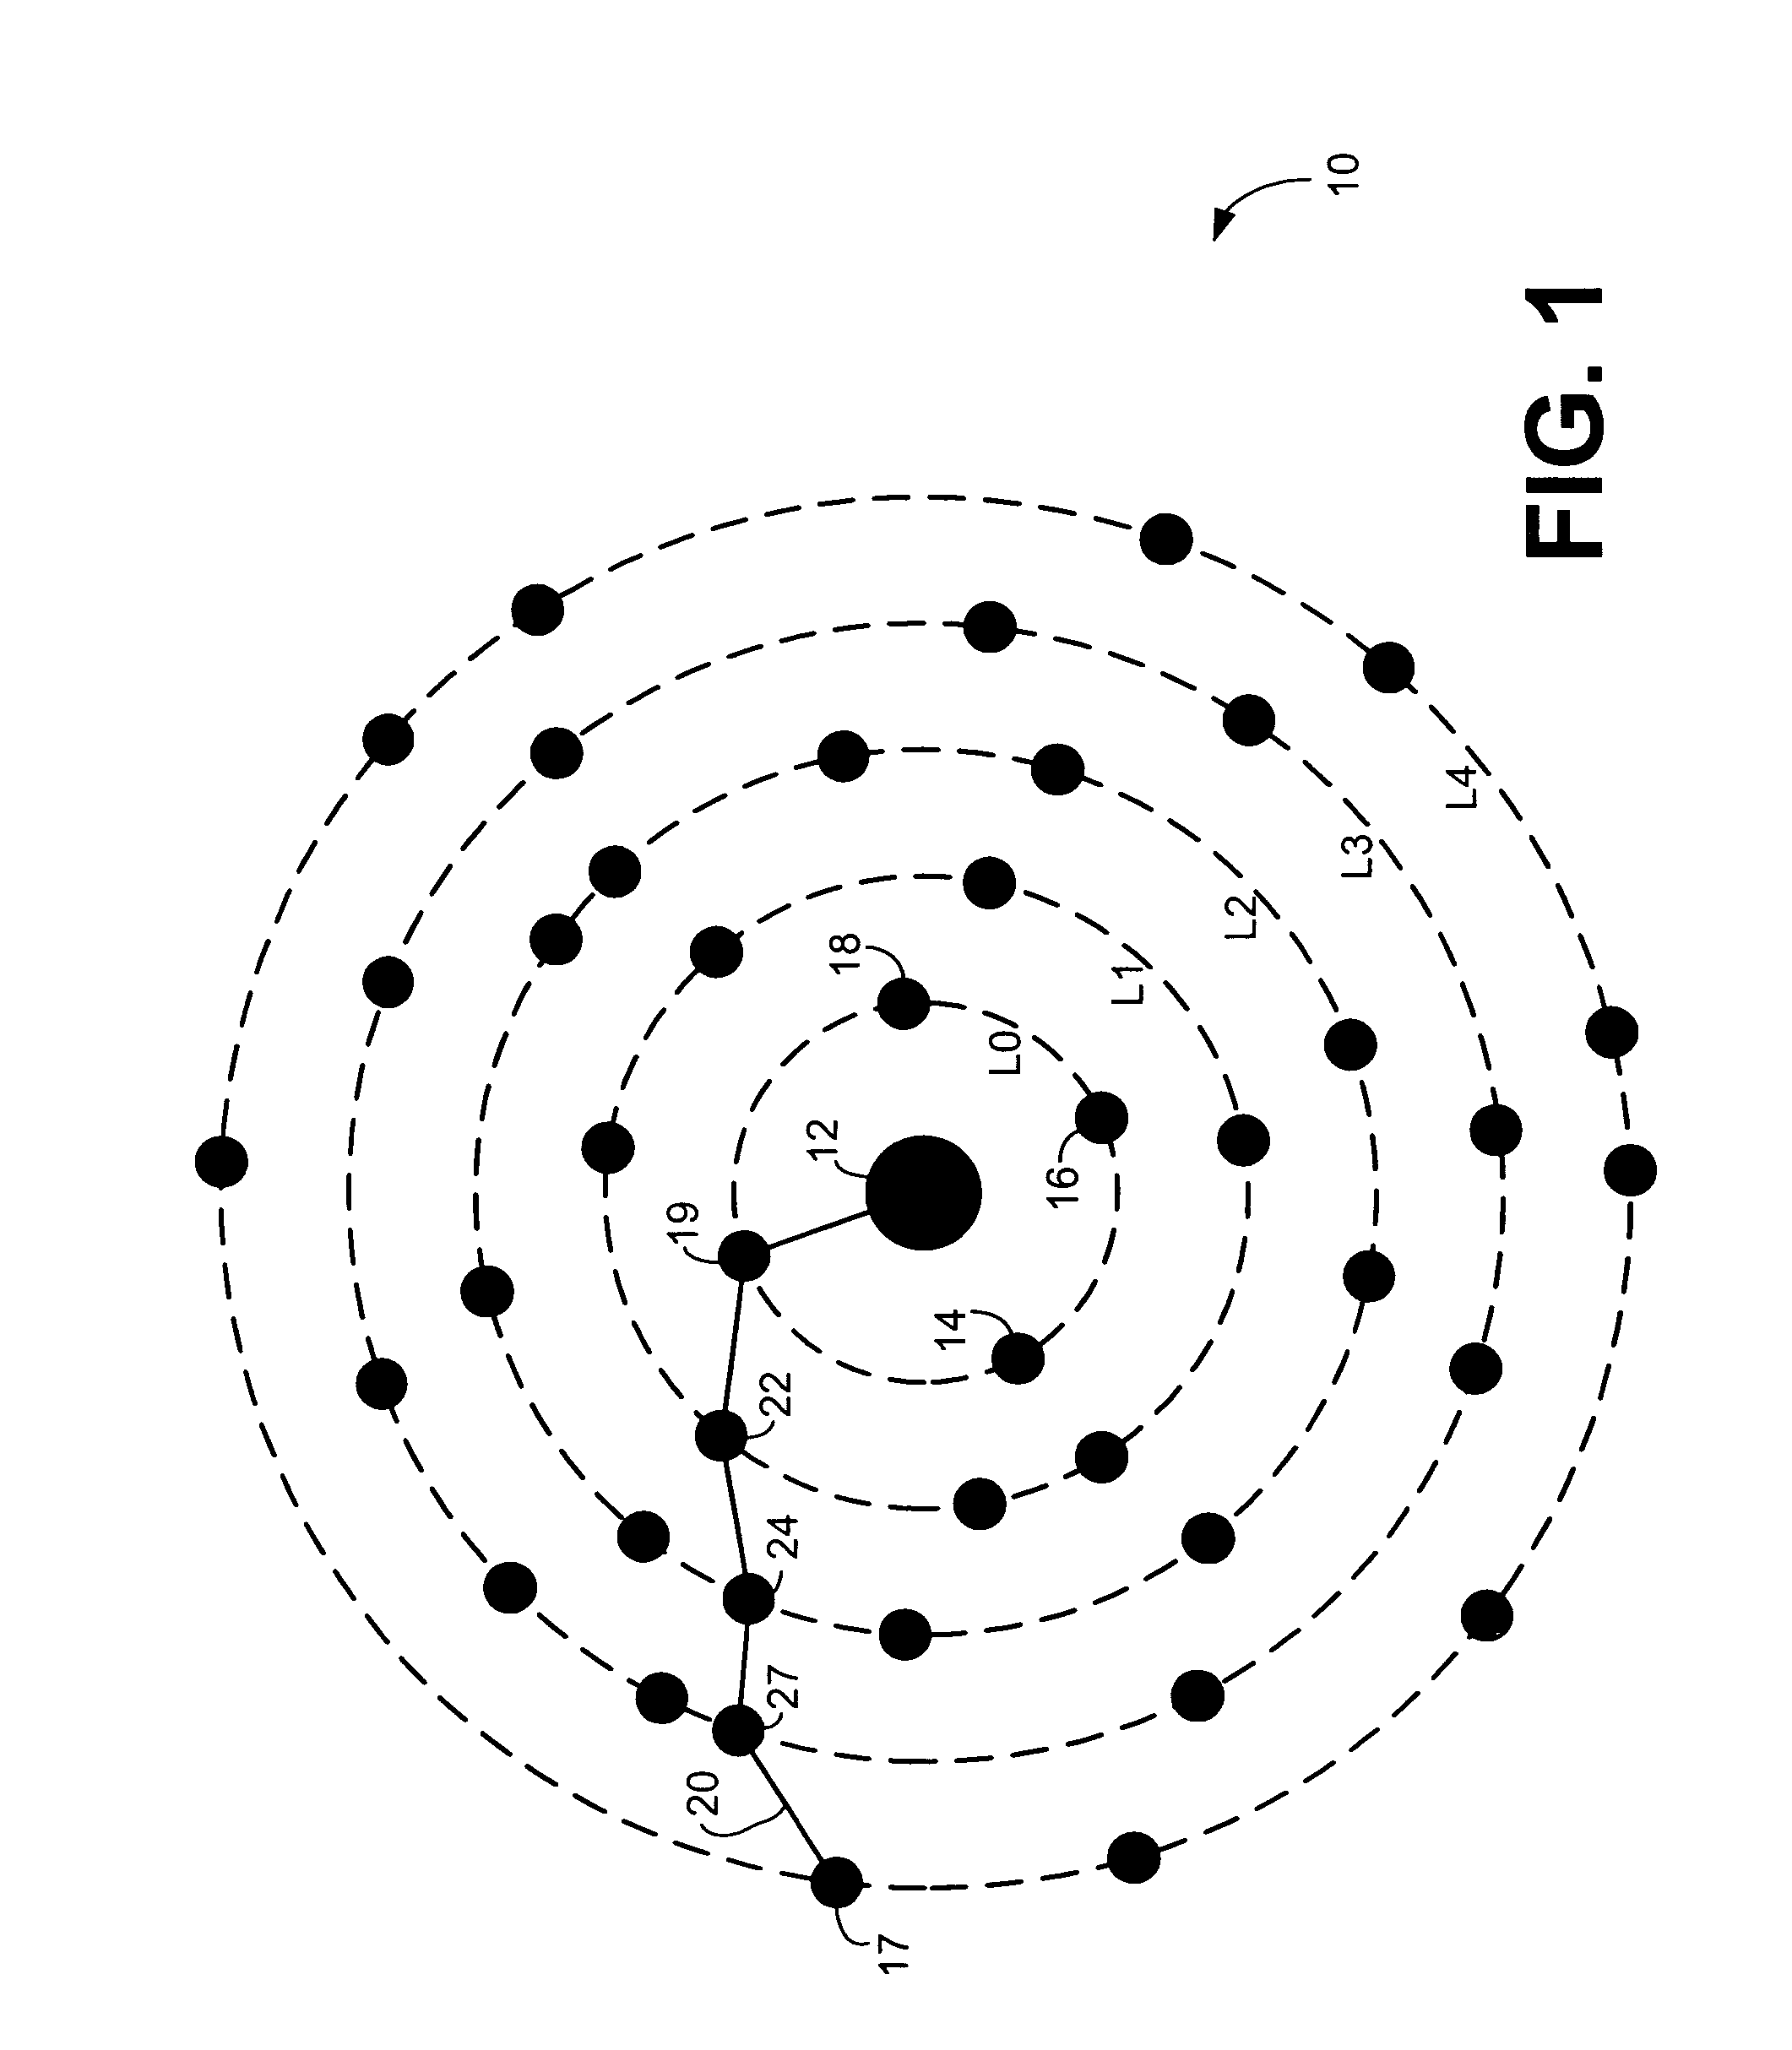 System and method for a wireless mesh network